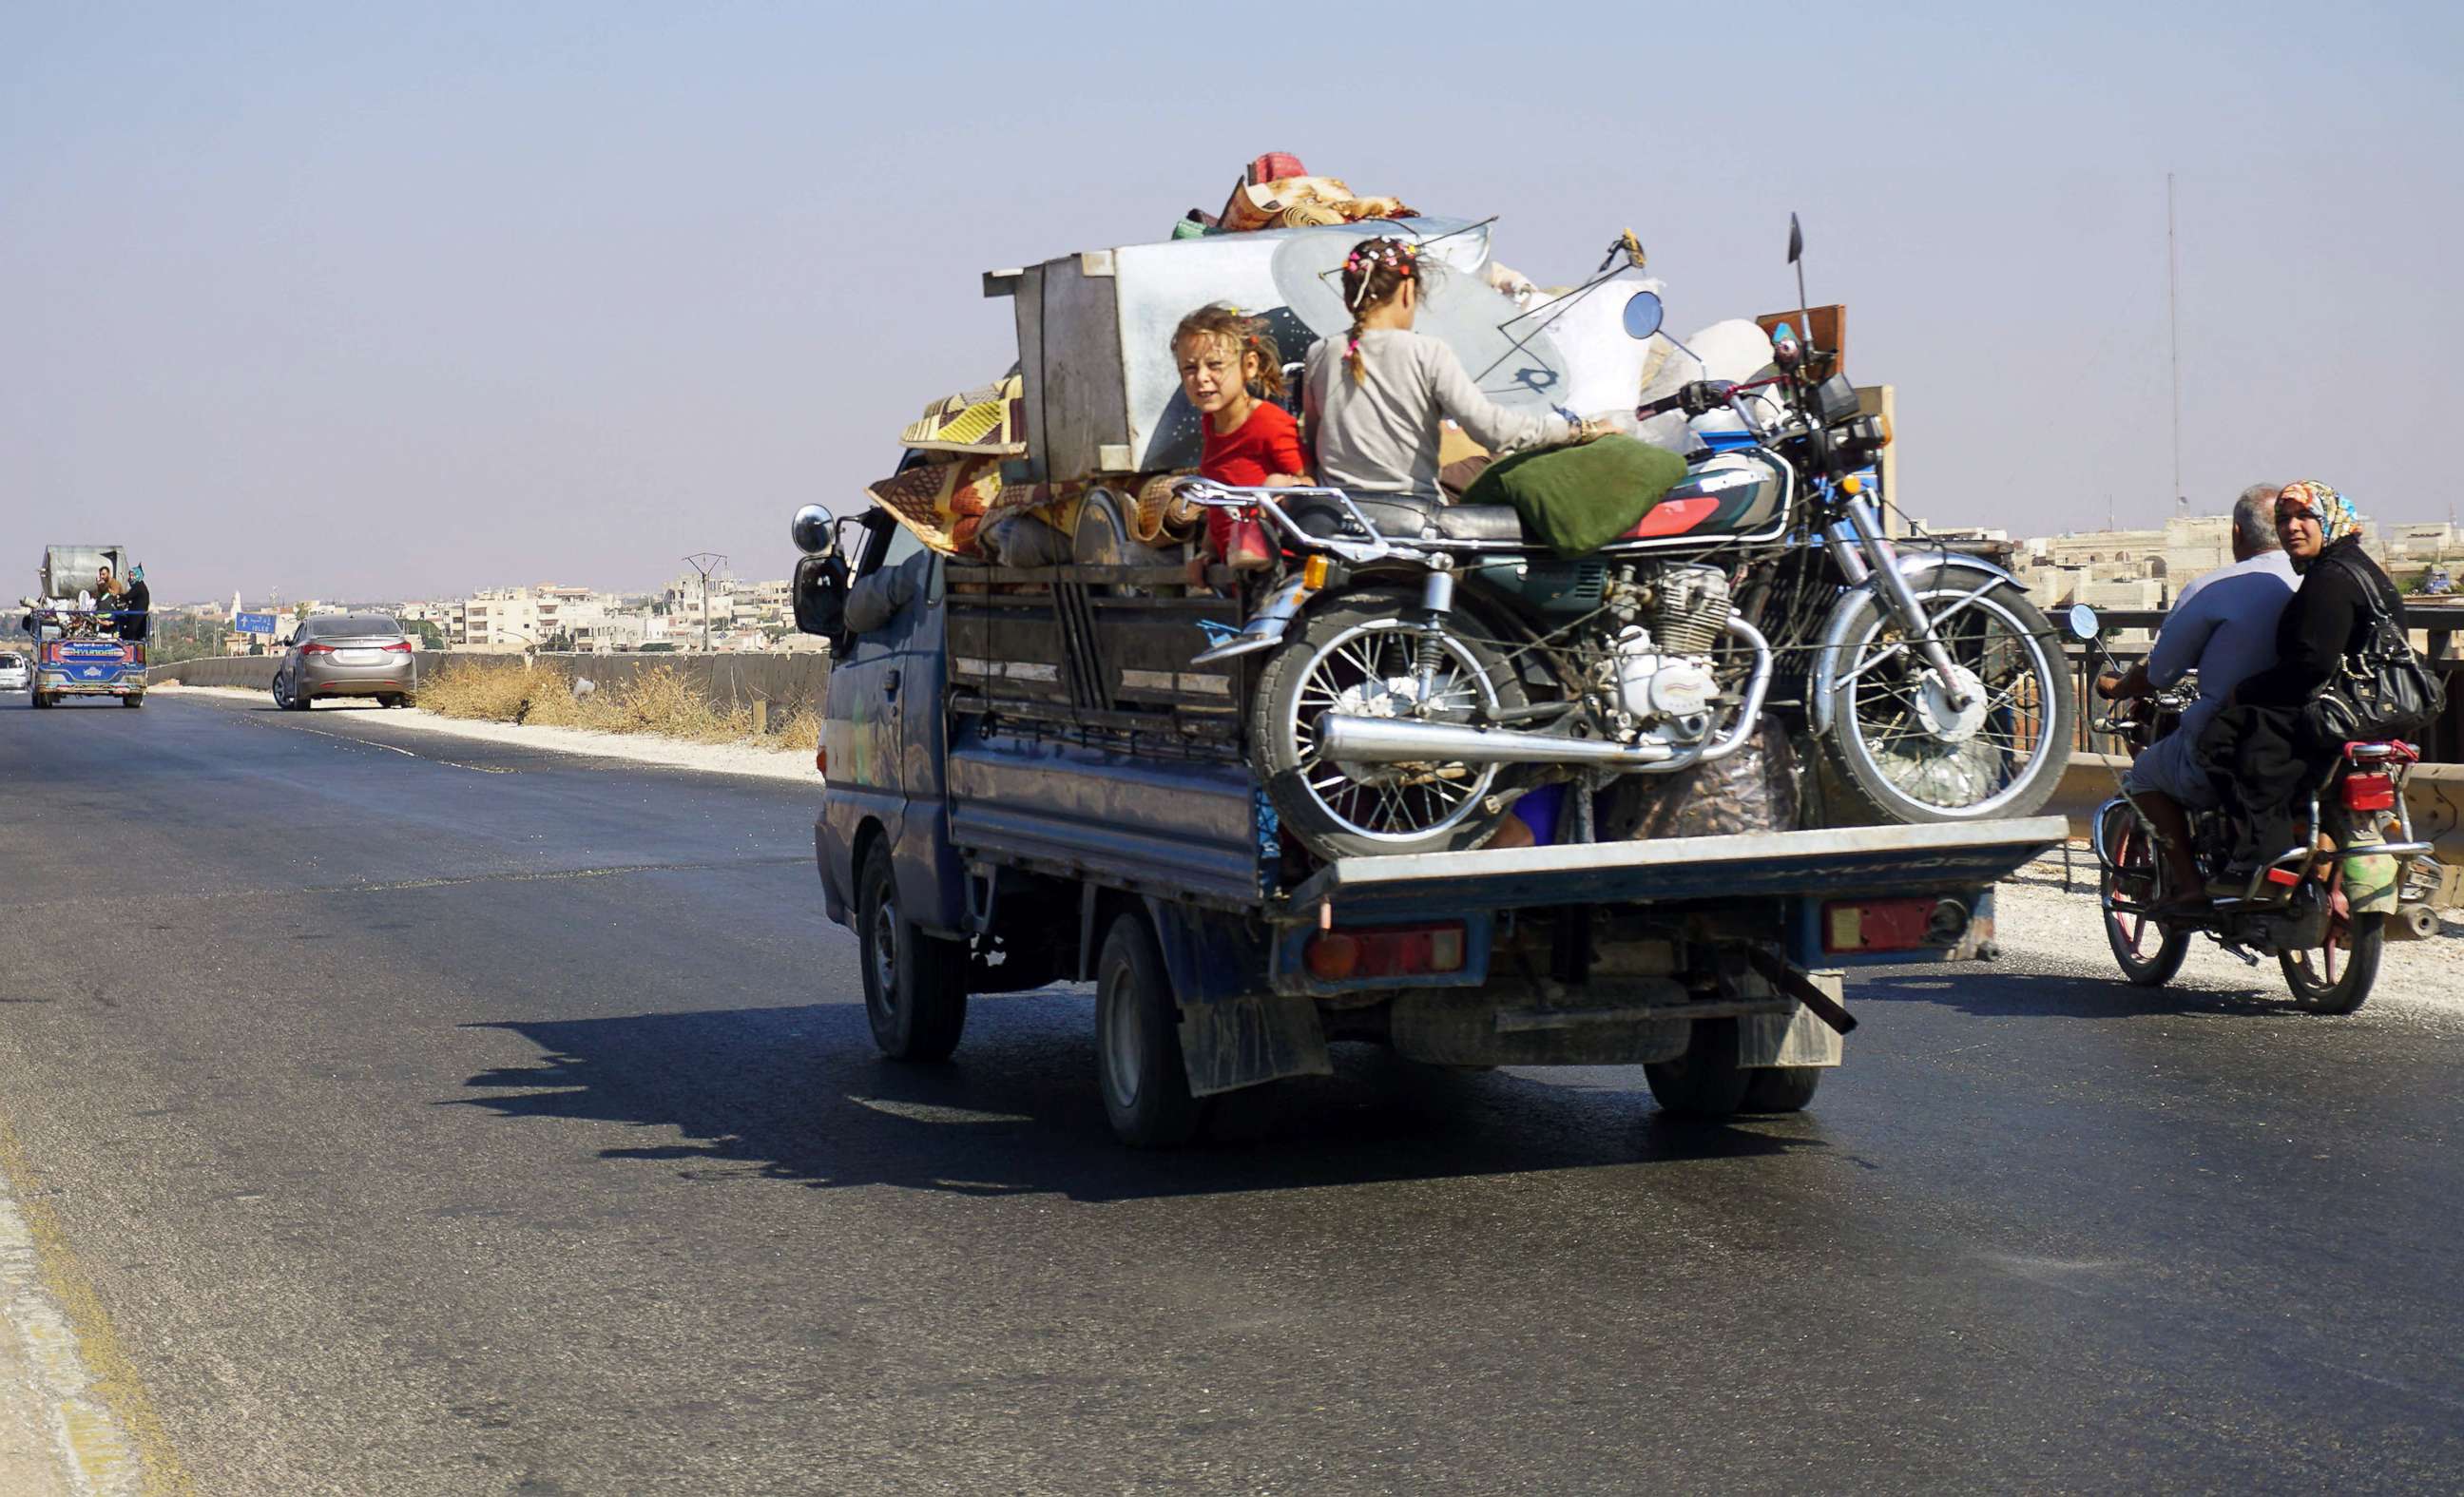 PHOTO: Syrian children riding in the back of a loaded truck drive along the main Damascus-Aleppo highway near the town of Saraqib in Syria's mostly rebel-held northern Idlib province, as families flee the countrysides of Hama and Idlib provinces.